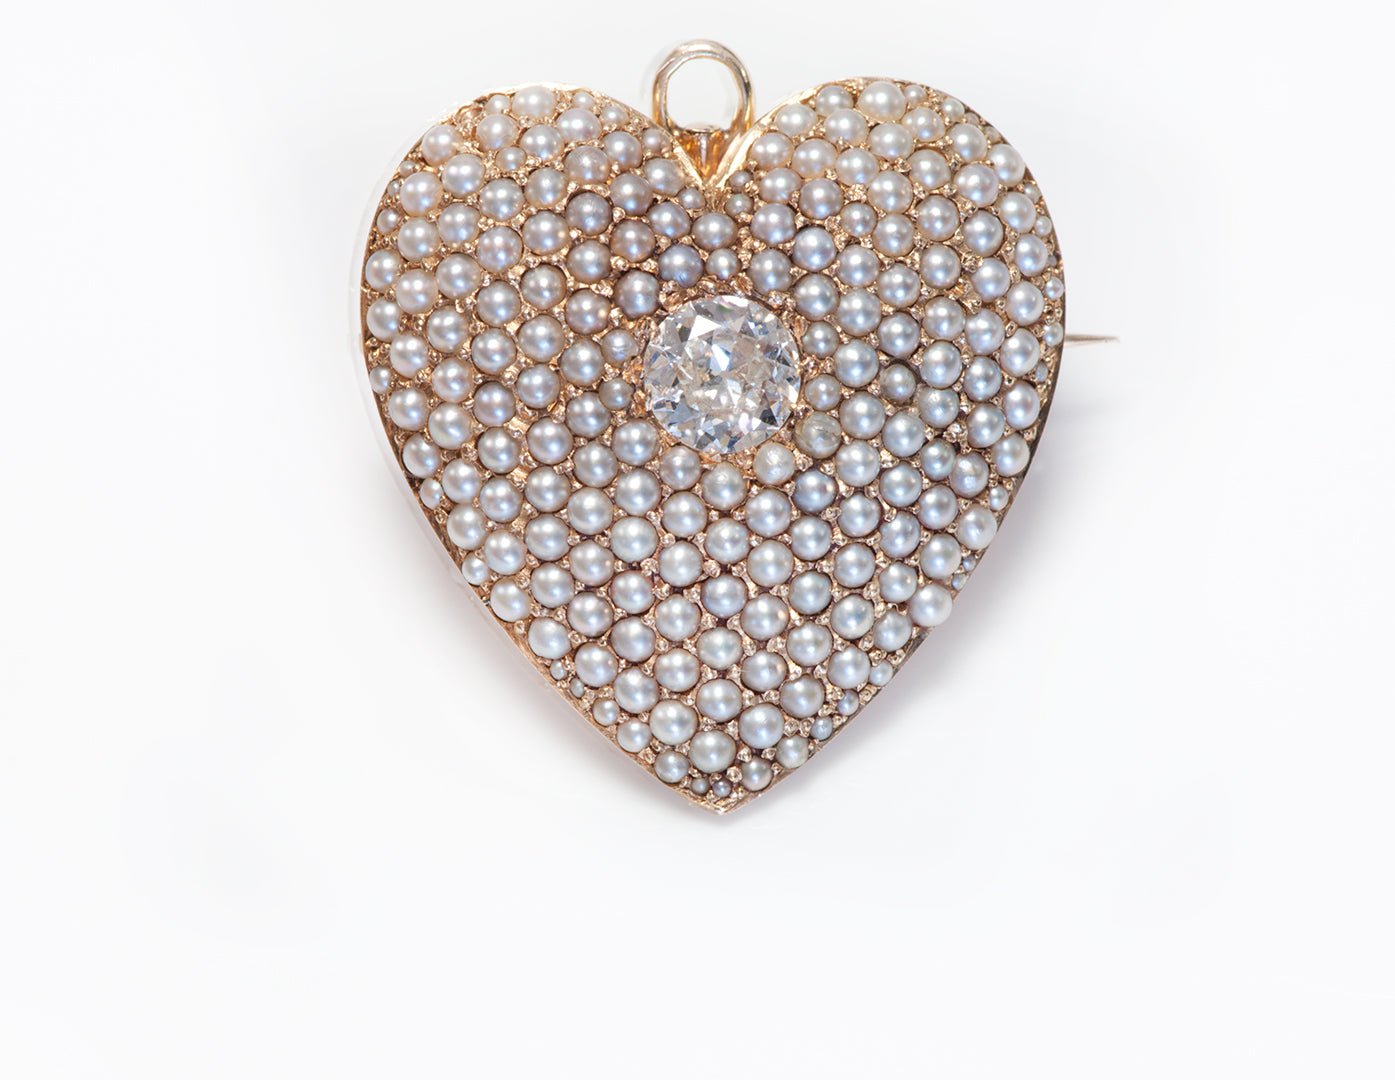 Antique Edwardian Gold Diamond Seed Pearl Heart Pendant Brooch - DSF Antique Jewelry